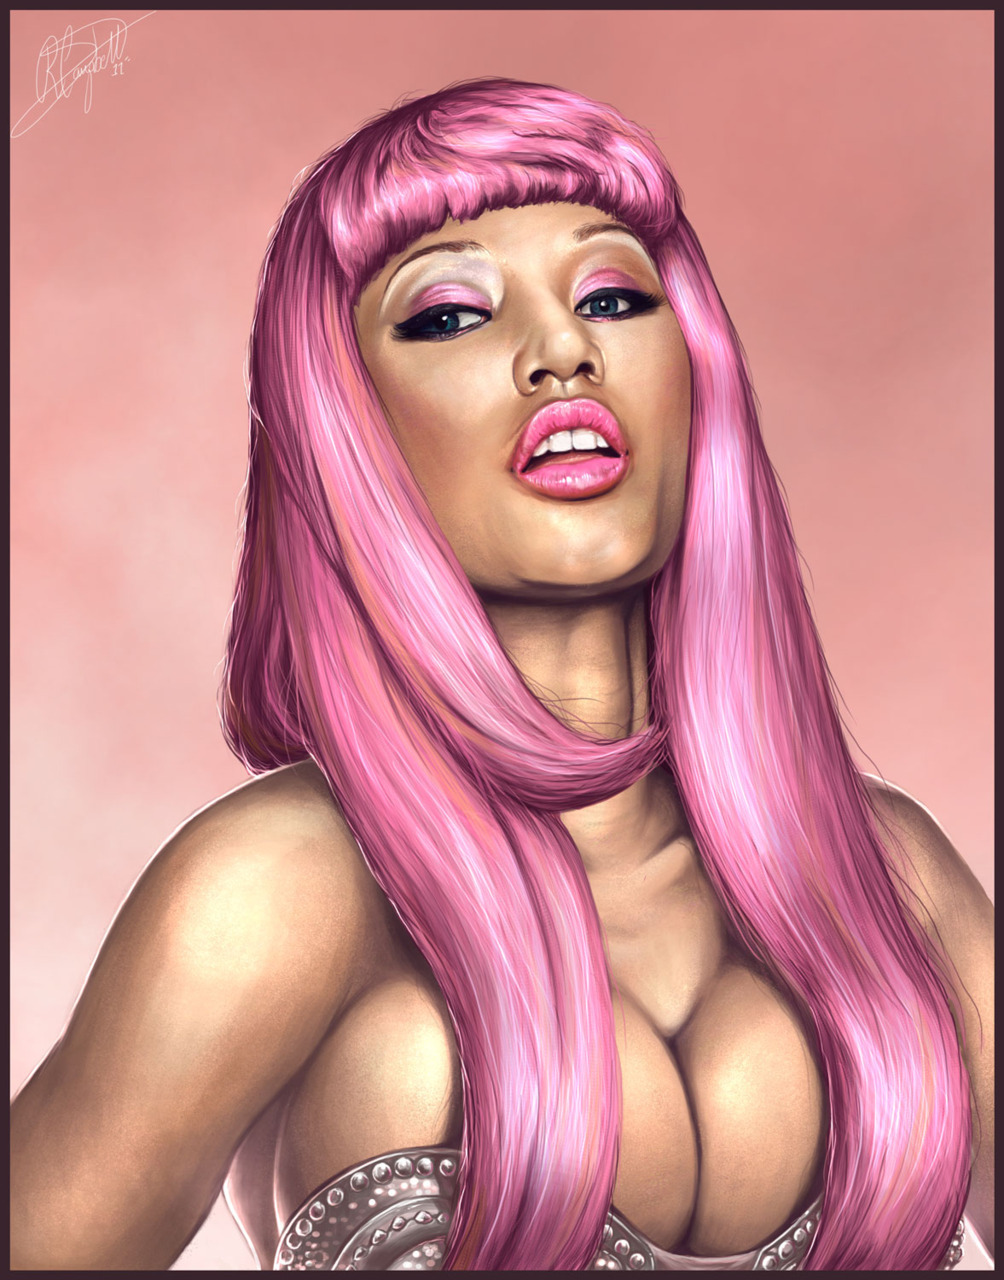 My friend requested me to draw her a picture of Nicki Minaj for her birthday, and so I did! Photoshop Elements 7.0 | Wacom Intuos 4 | About 10 hours. You can full view it here. I just got my new art blog up and running! Feel free to follow!